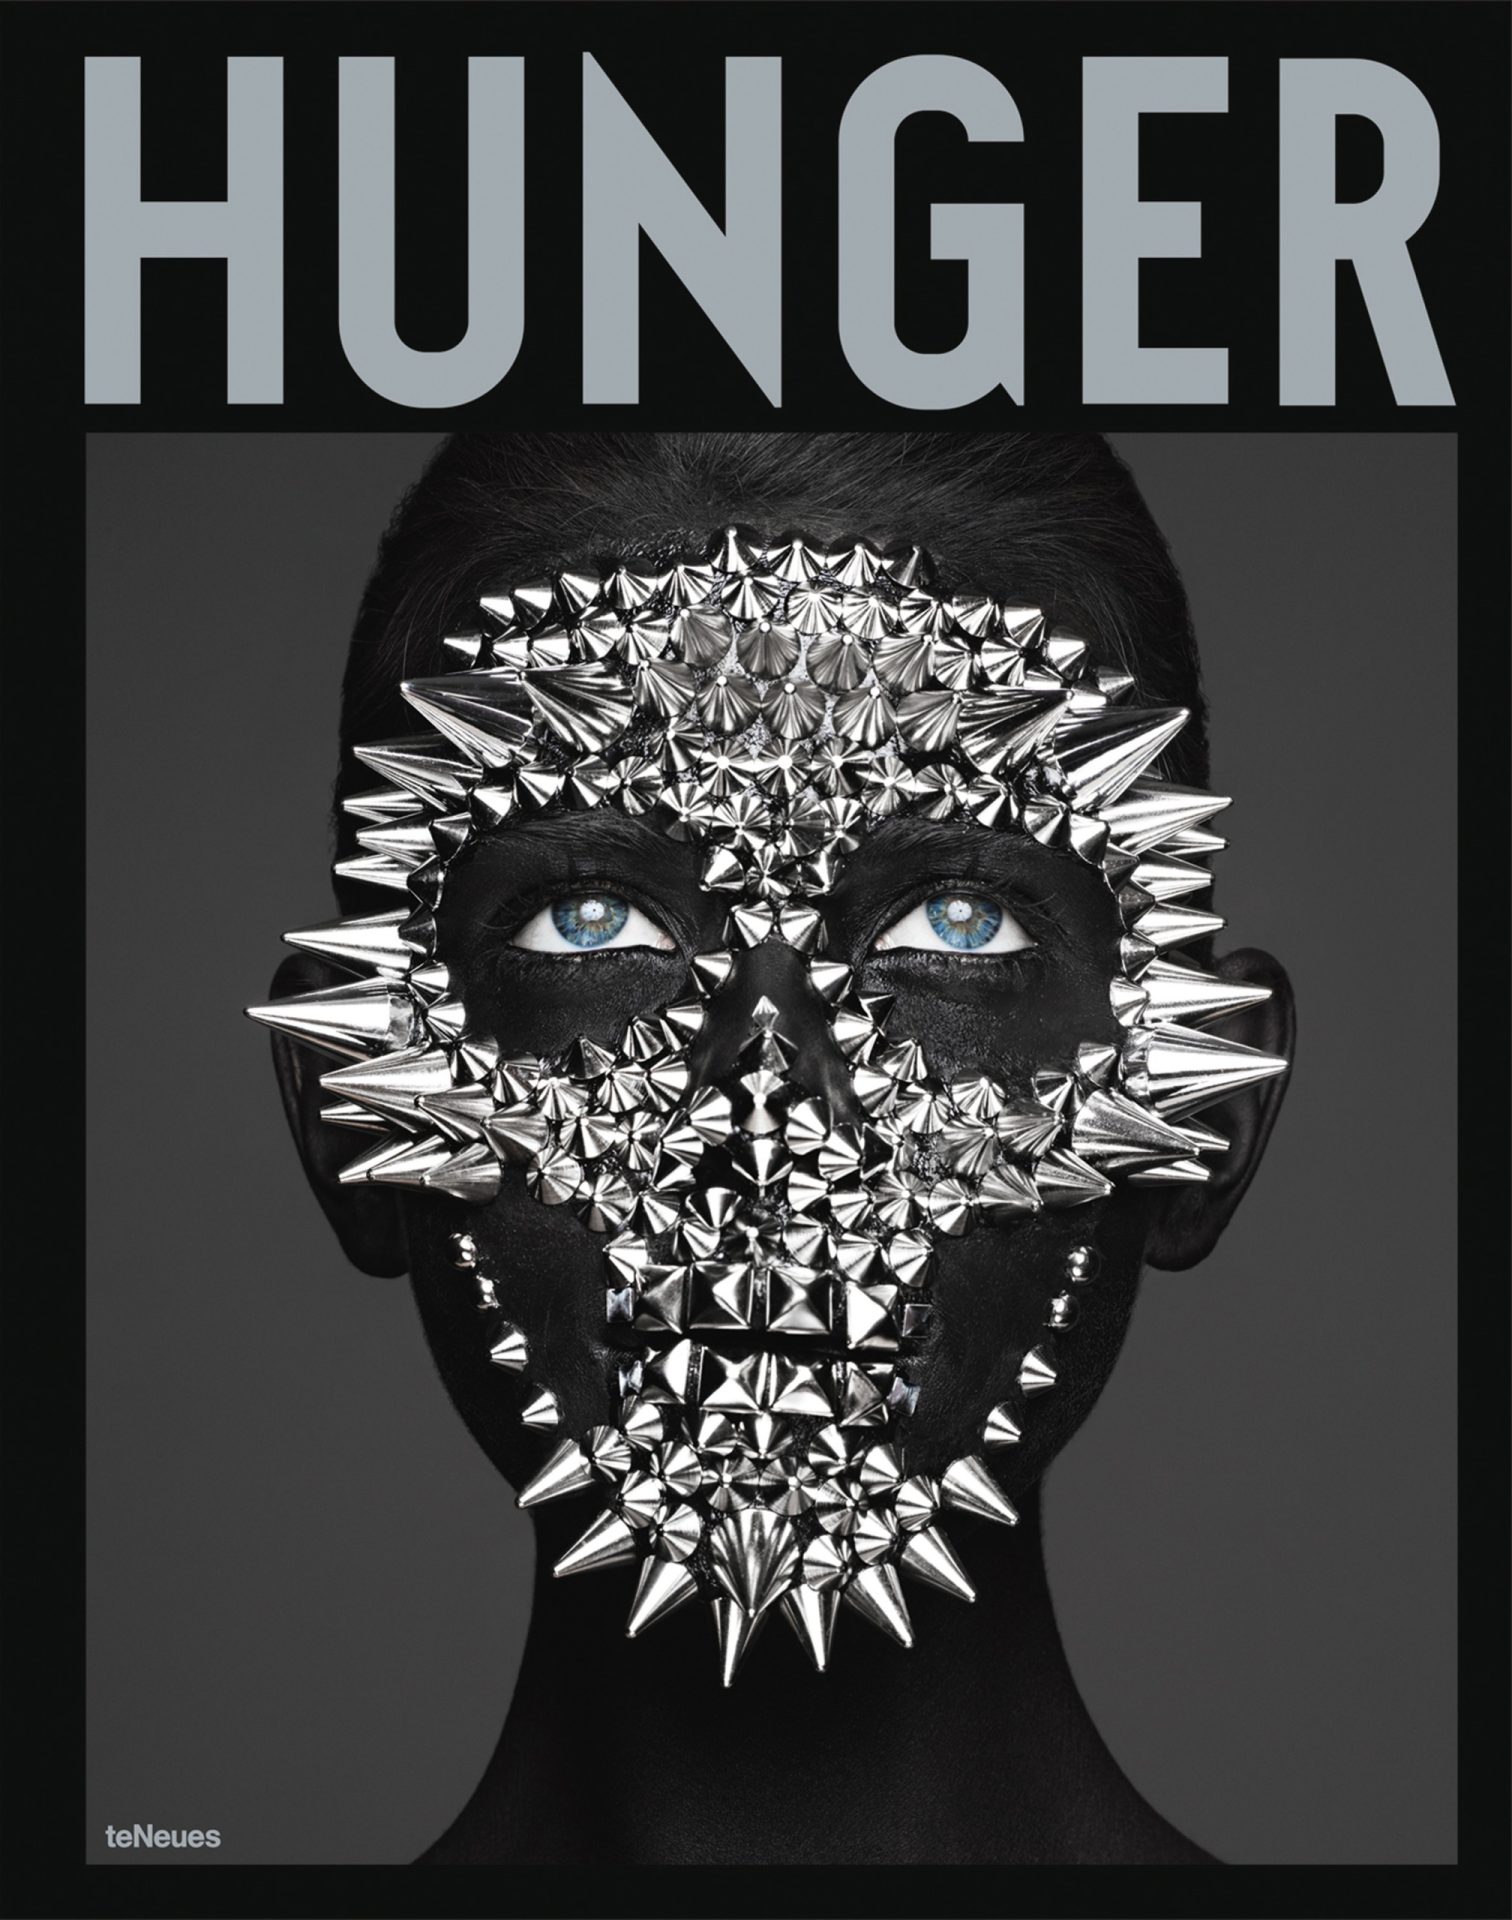 Hunger: The Book by Rankin